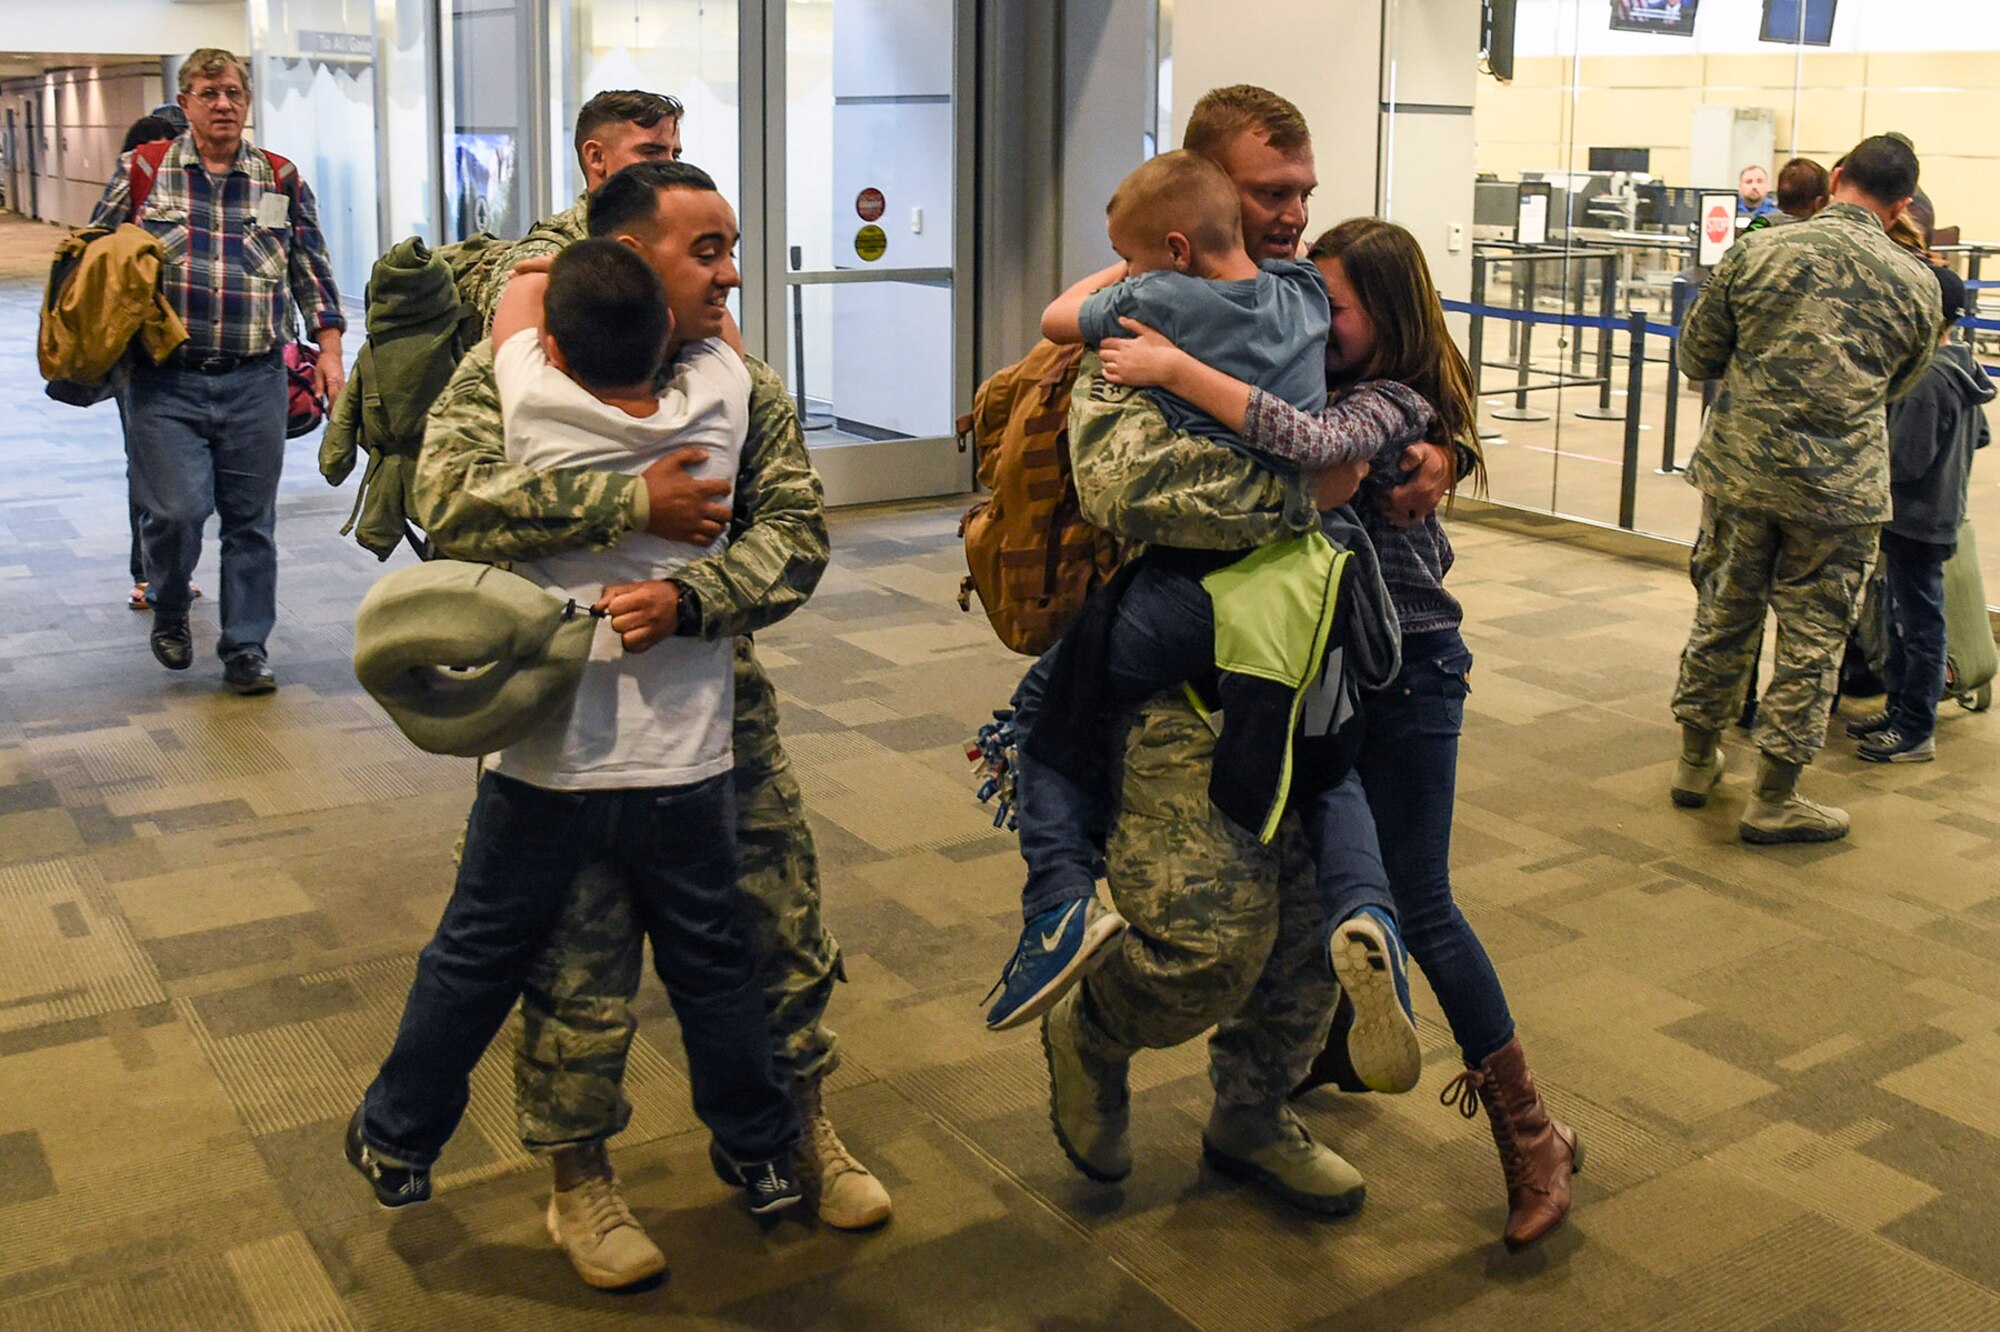 U.S. Air Force Senior Airman Leonardo Perez (left) and Staff Sgt. Kenny Smith (right), both from the 144th Security Forces Squadron, are eagerly greeted by their children at the Fresno Yosemite International Airport Jan. 21, 2015. The 144th Fighter Wing Airmen from Fresno, California were deployed for more than seven months in support of Operation Enduring Freedom. (U.S. Air National Guard photo by Senior Master Sgt. Chris Drudge)